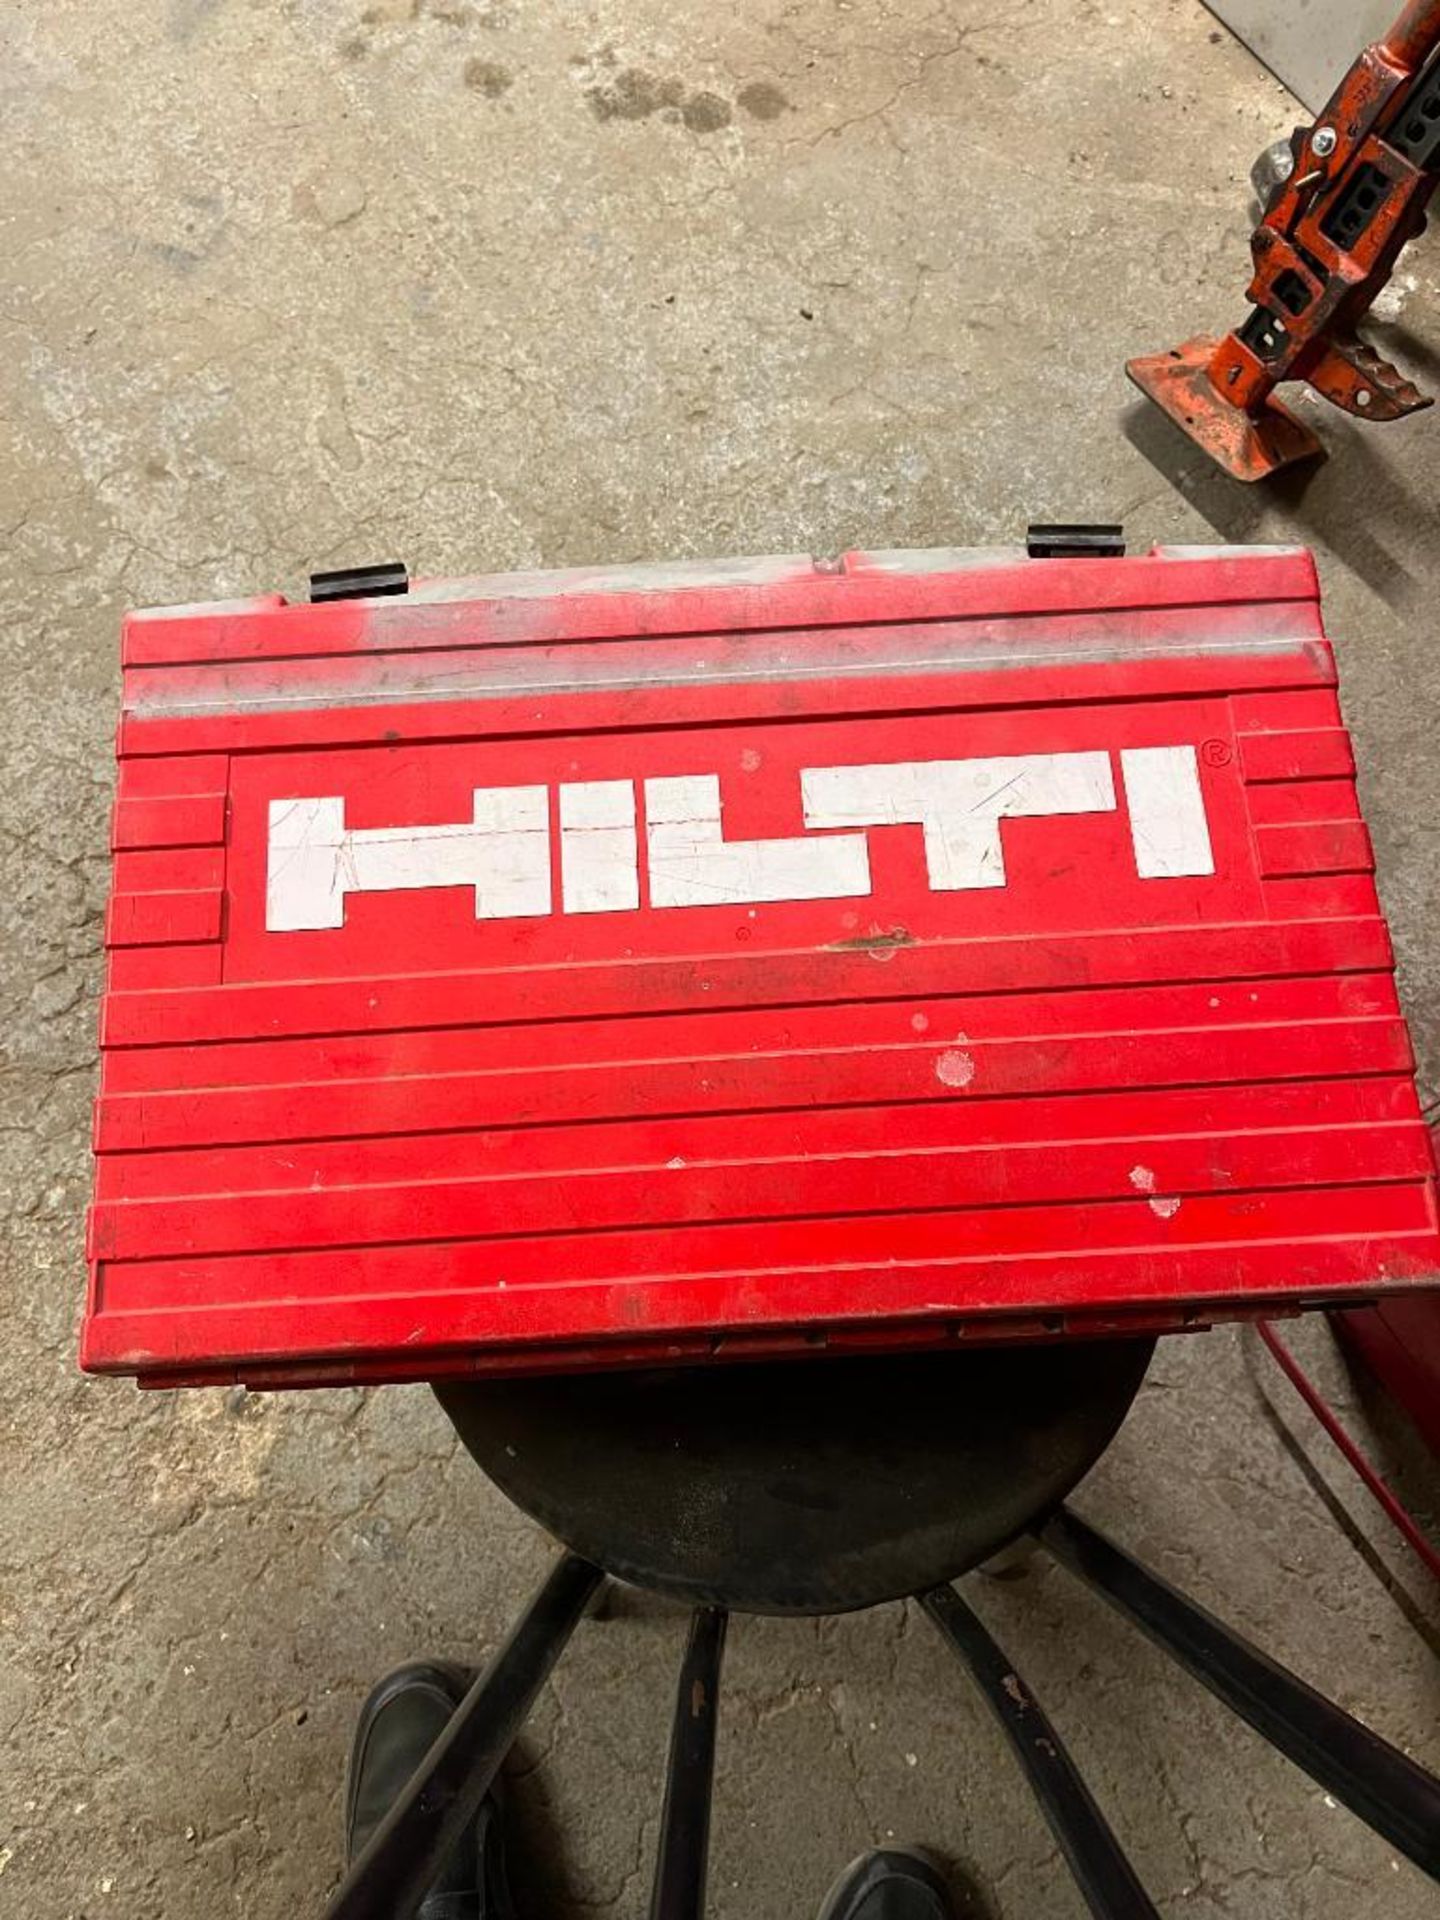 Shim stock, Torch, Hilti Bits, Green and Blue Tool Kits and Hilti Jack Hammer - Rigging Fee: $200 - Image 8 of 8